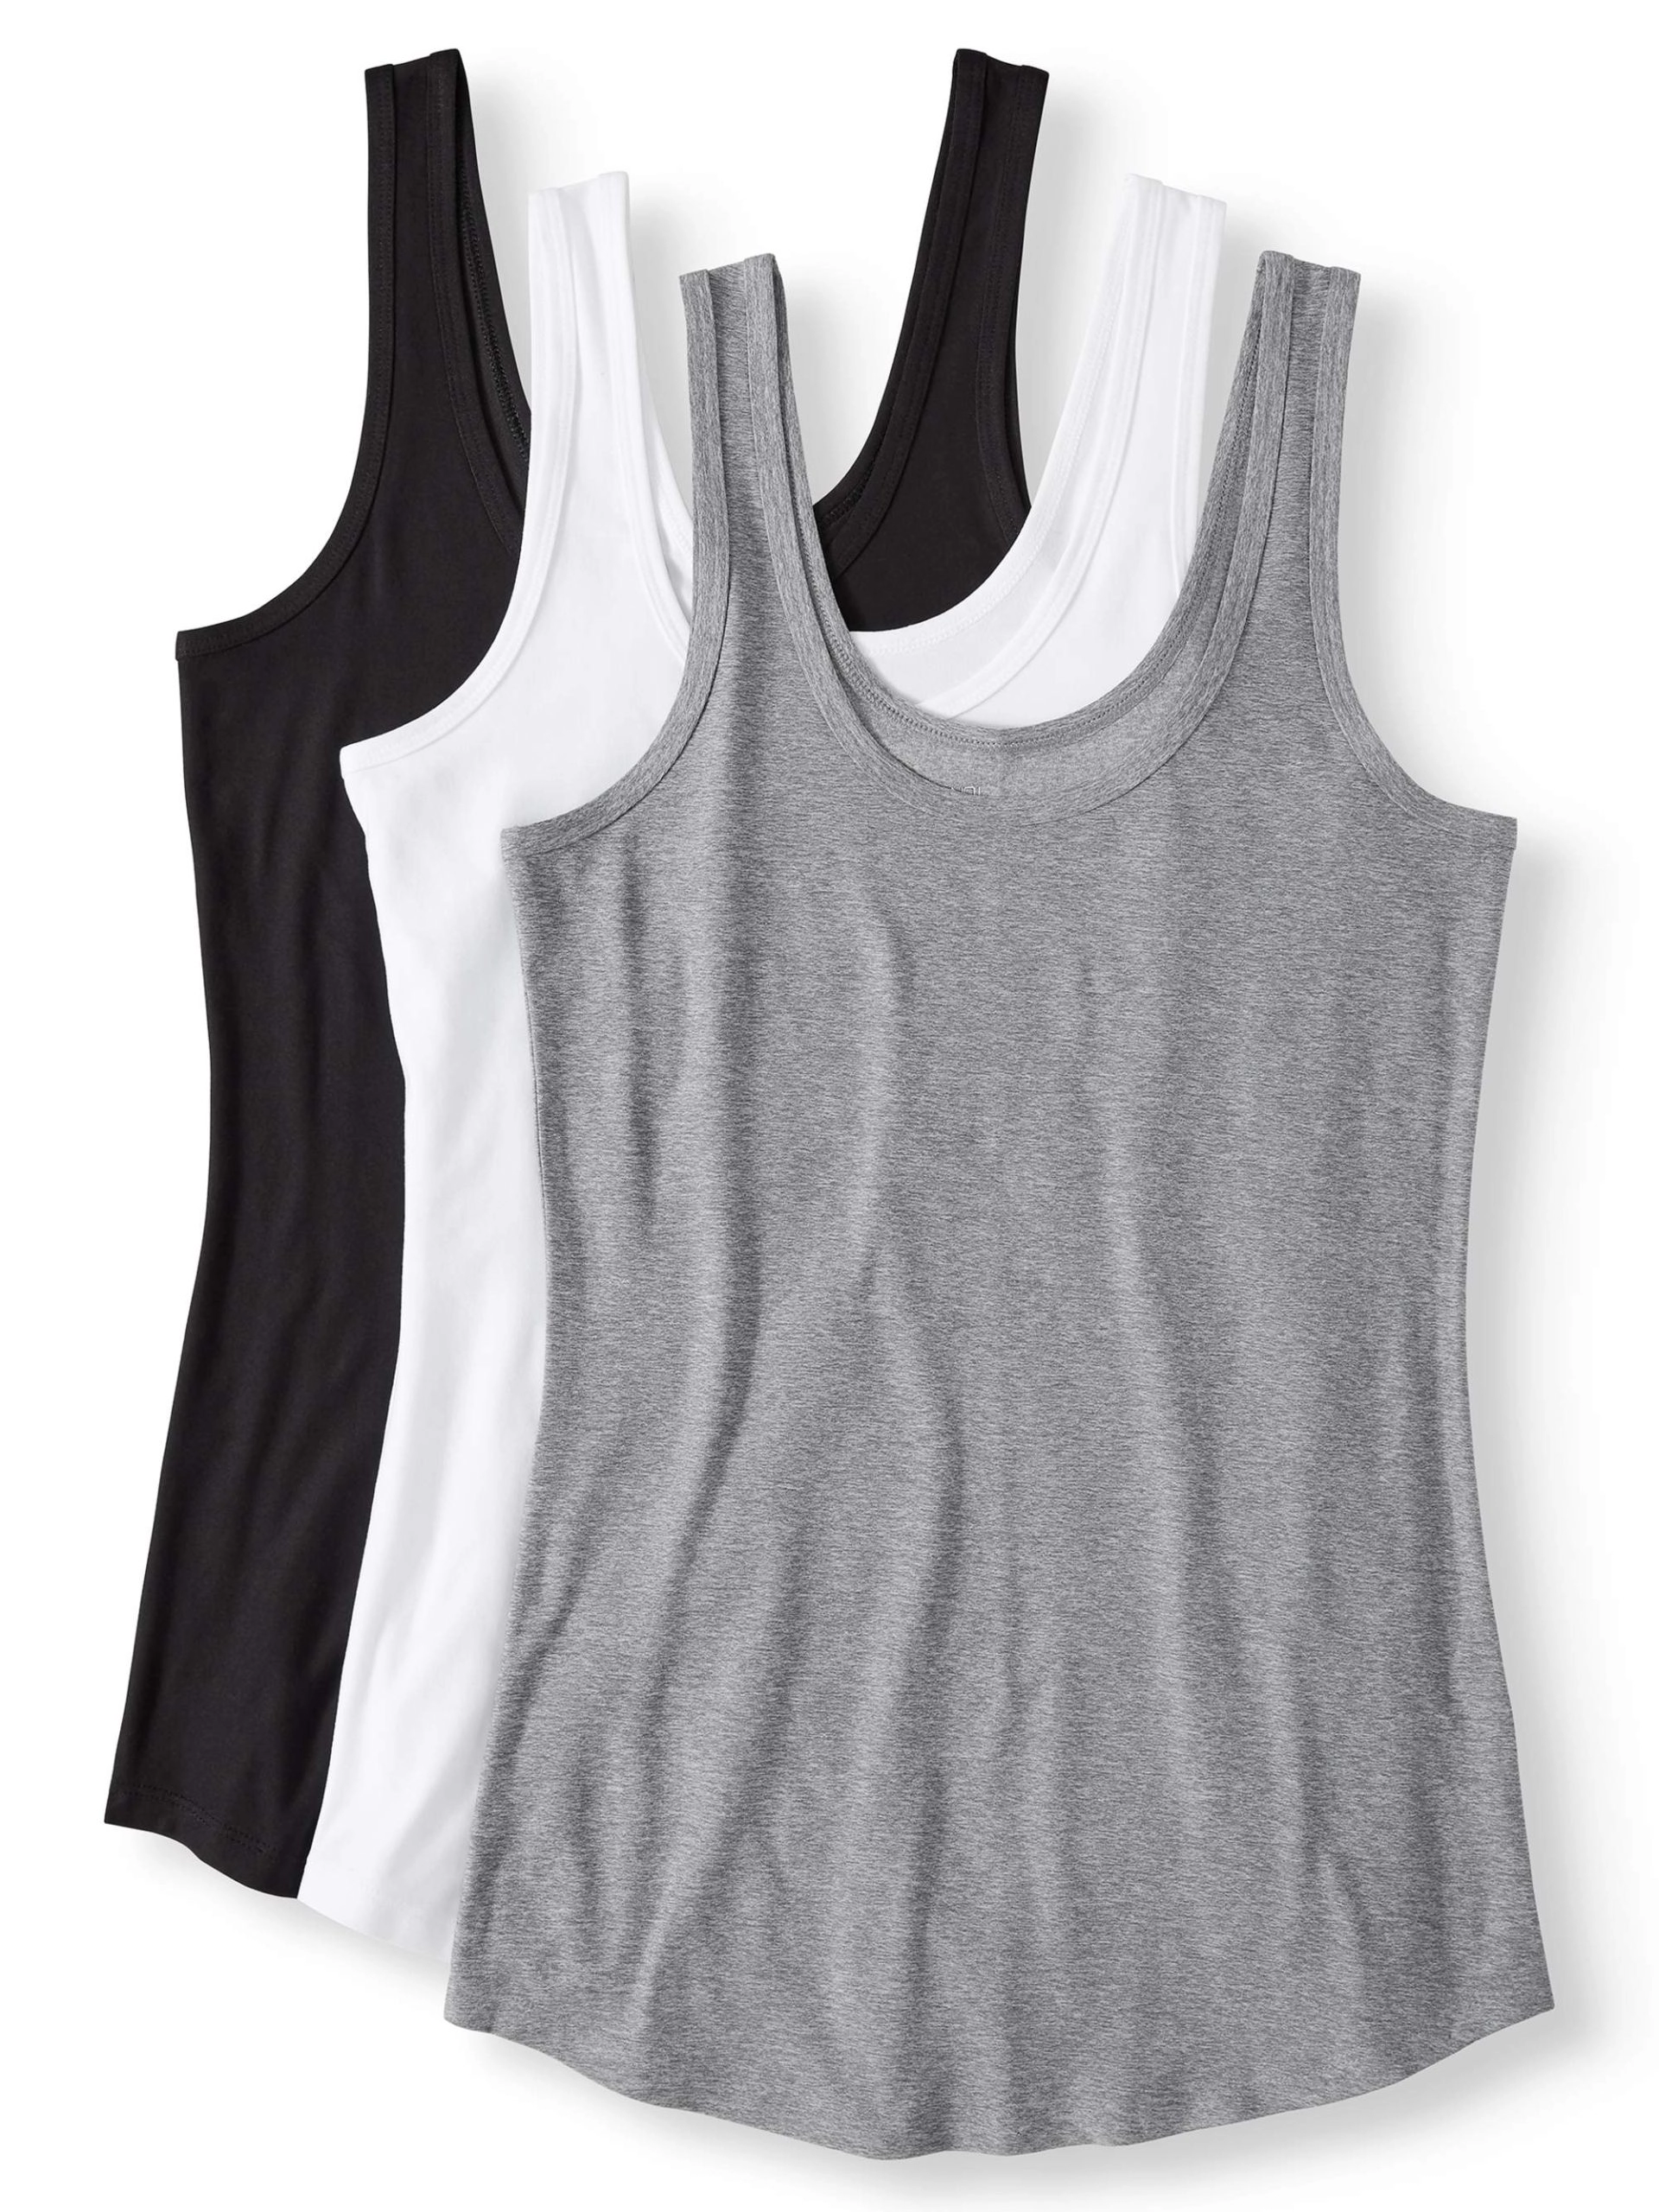 Gsm Tank Top China Trade,buy China Direct From Gsm Tank Top Factories